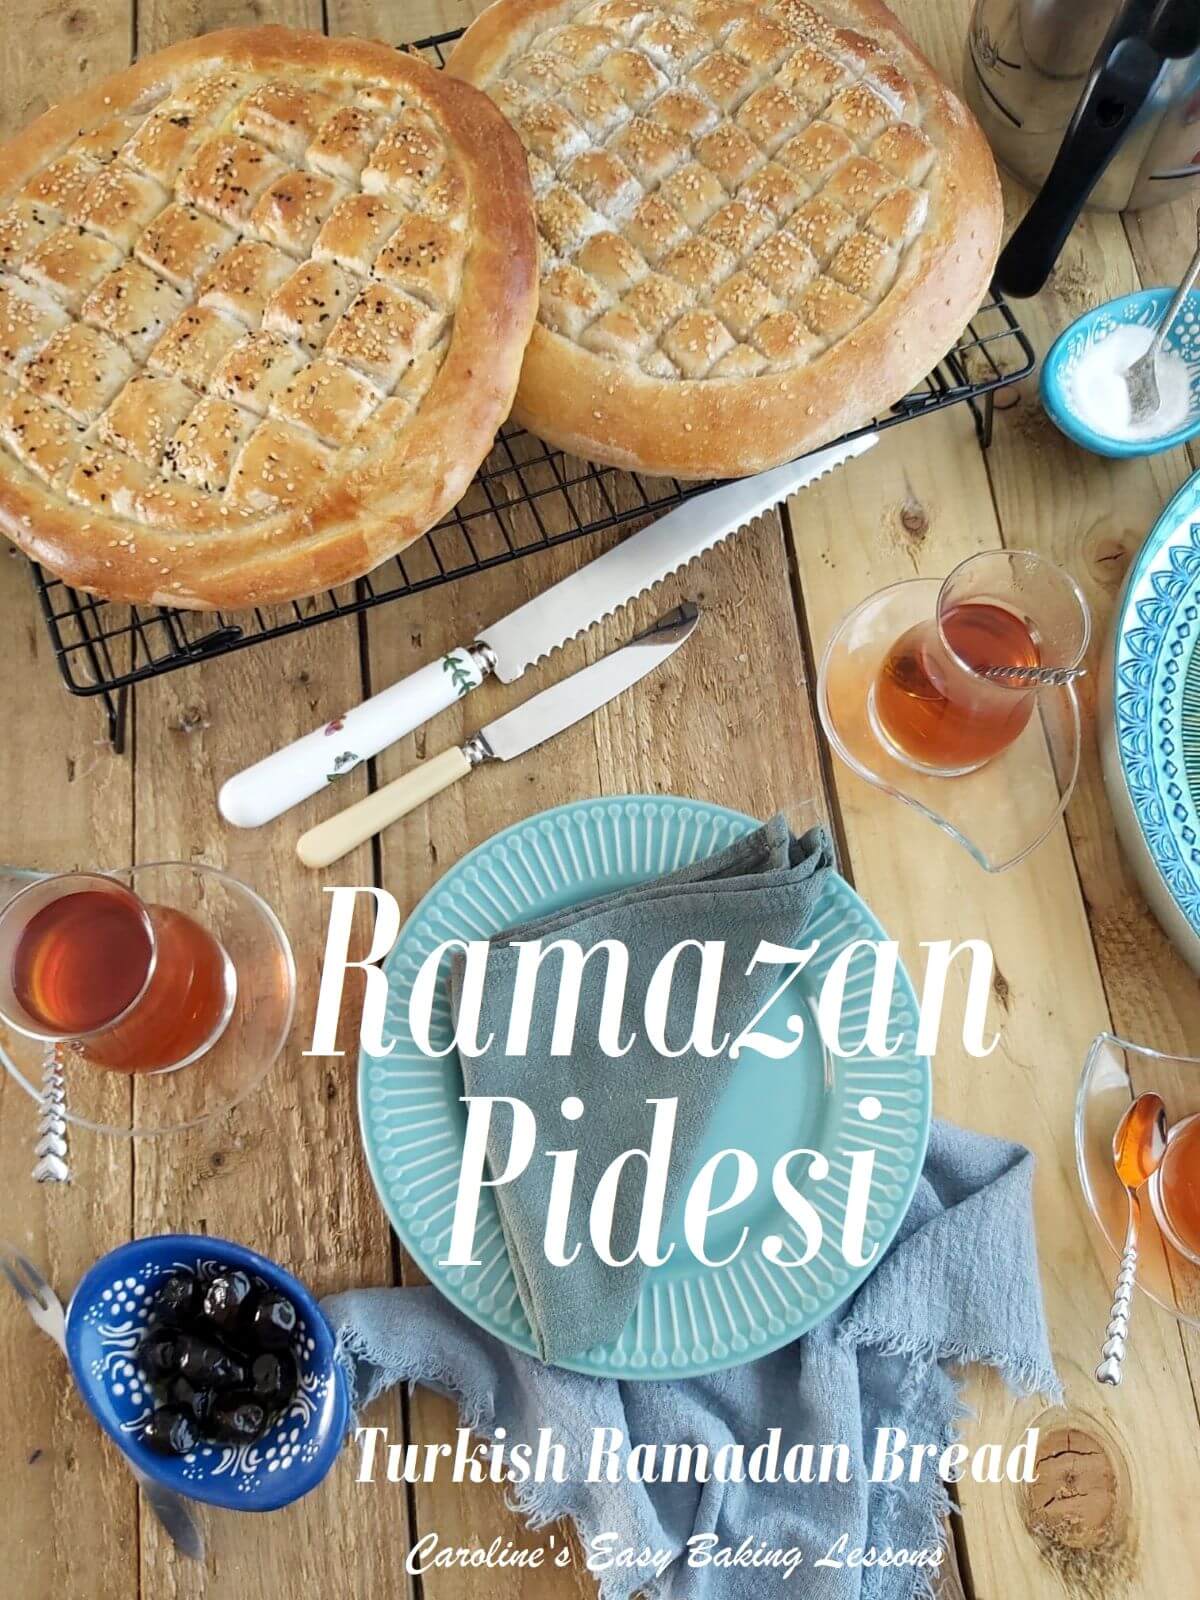 Overhead wooden table shot of ramazan round thick flatbread with diamond pattern, cooling next to Turkish tea and plates with title.